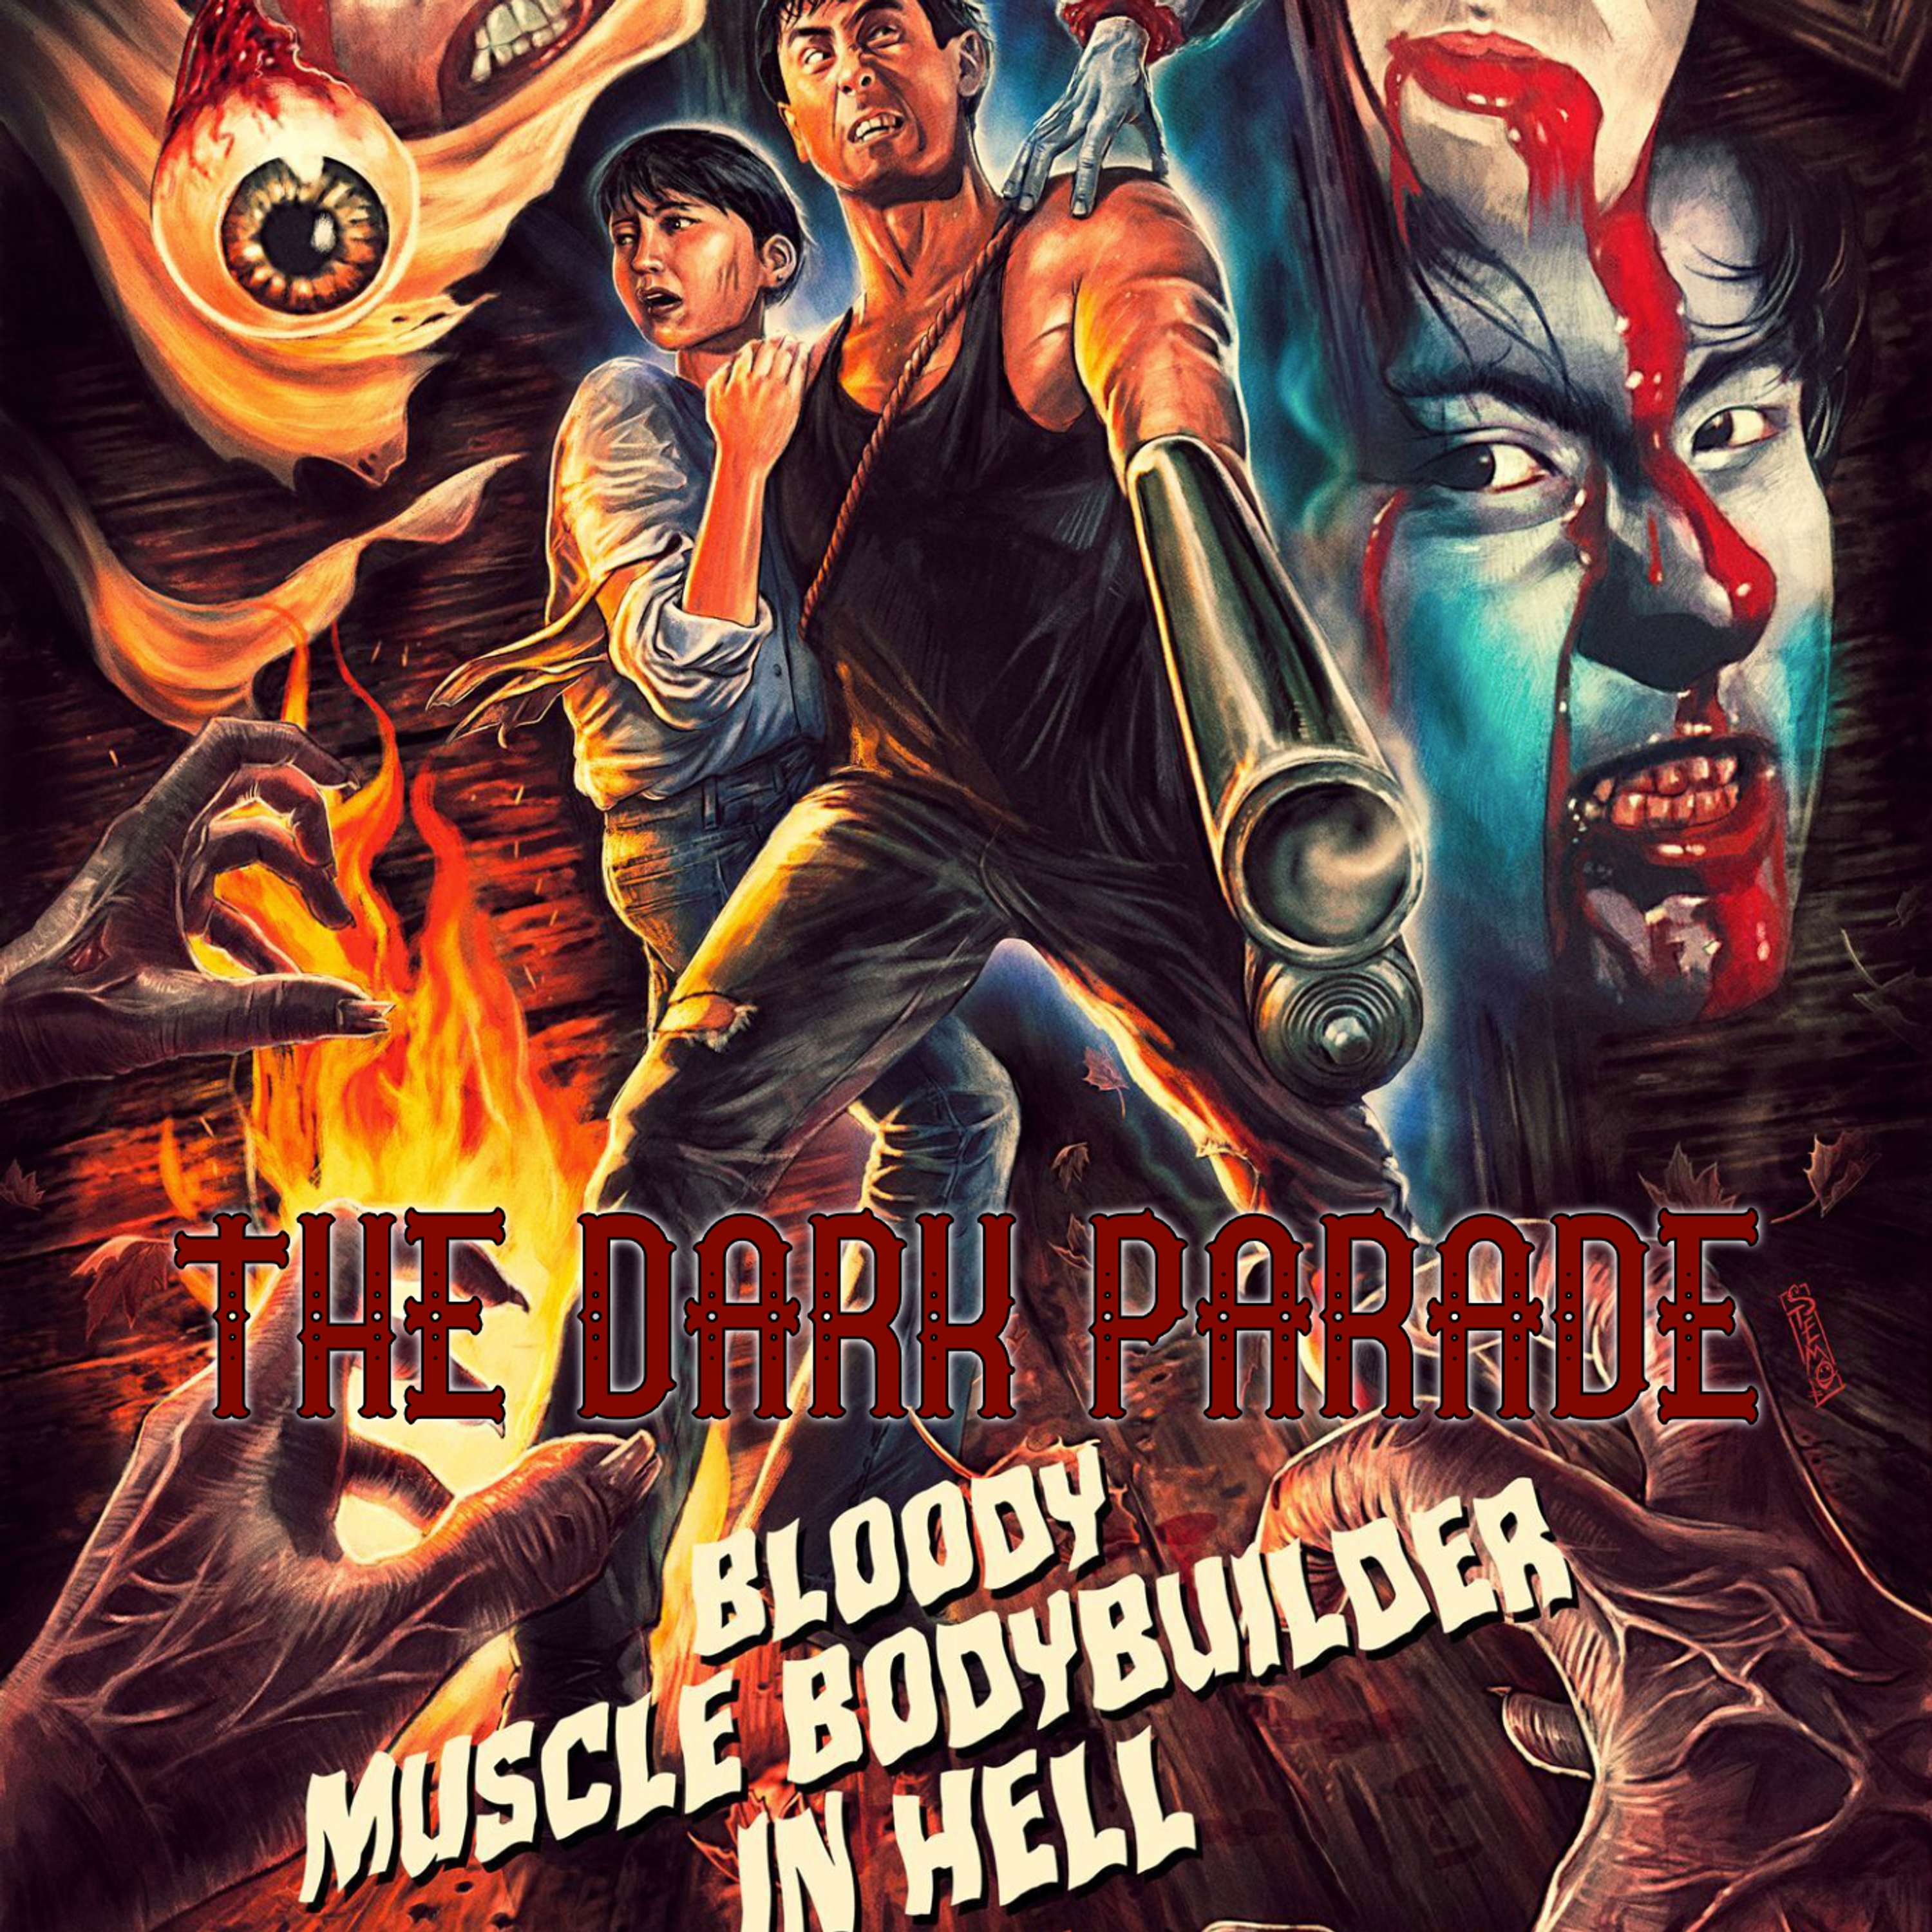 The Dark Parade #39: Bloody Muscle Body Builder in Hell